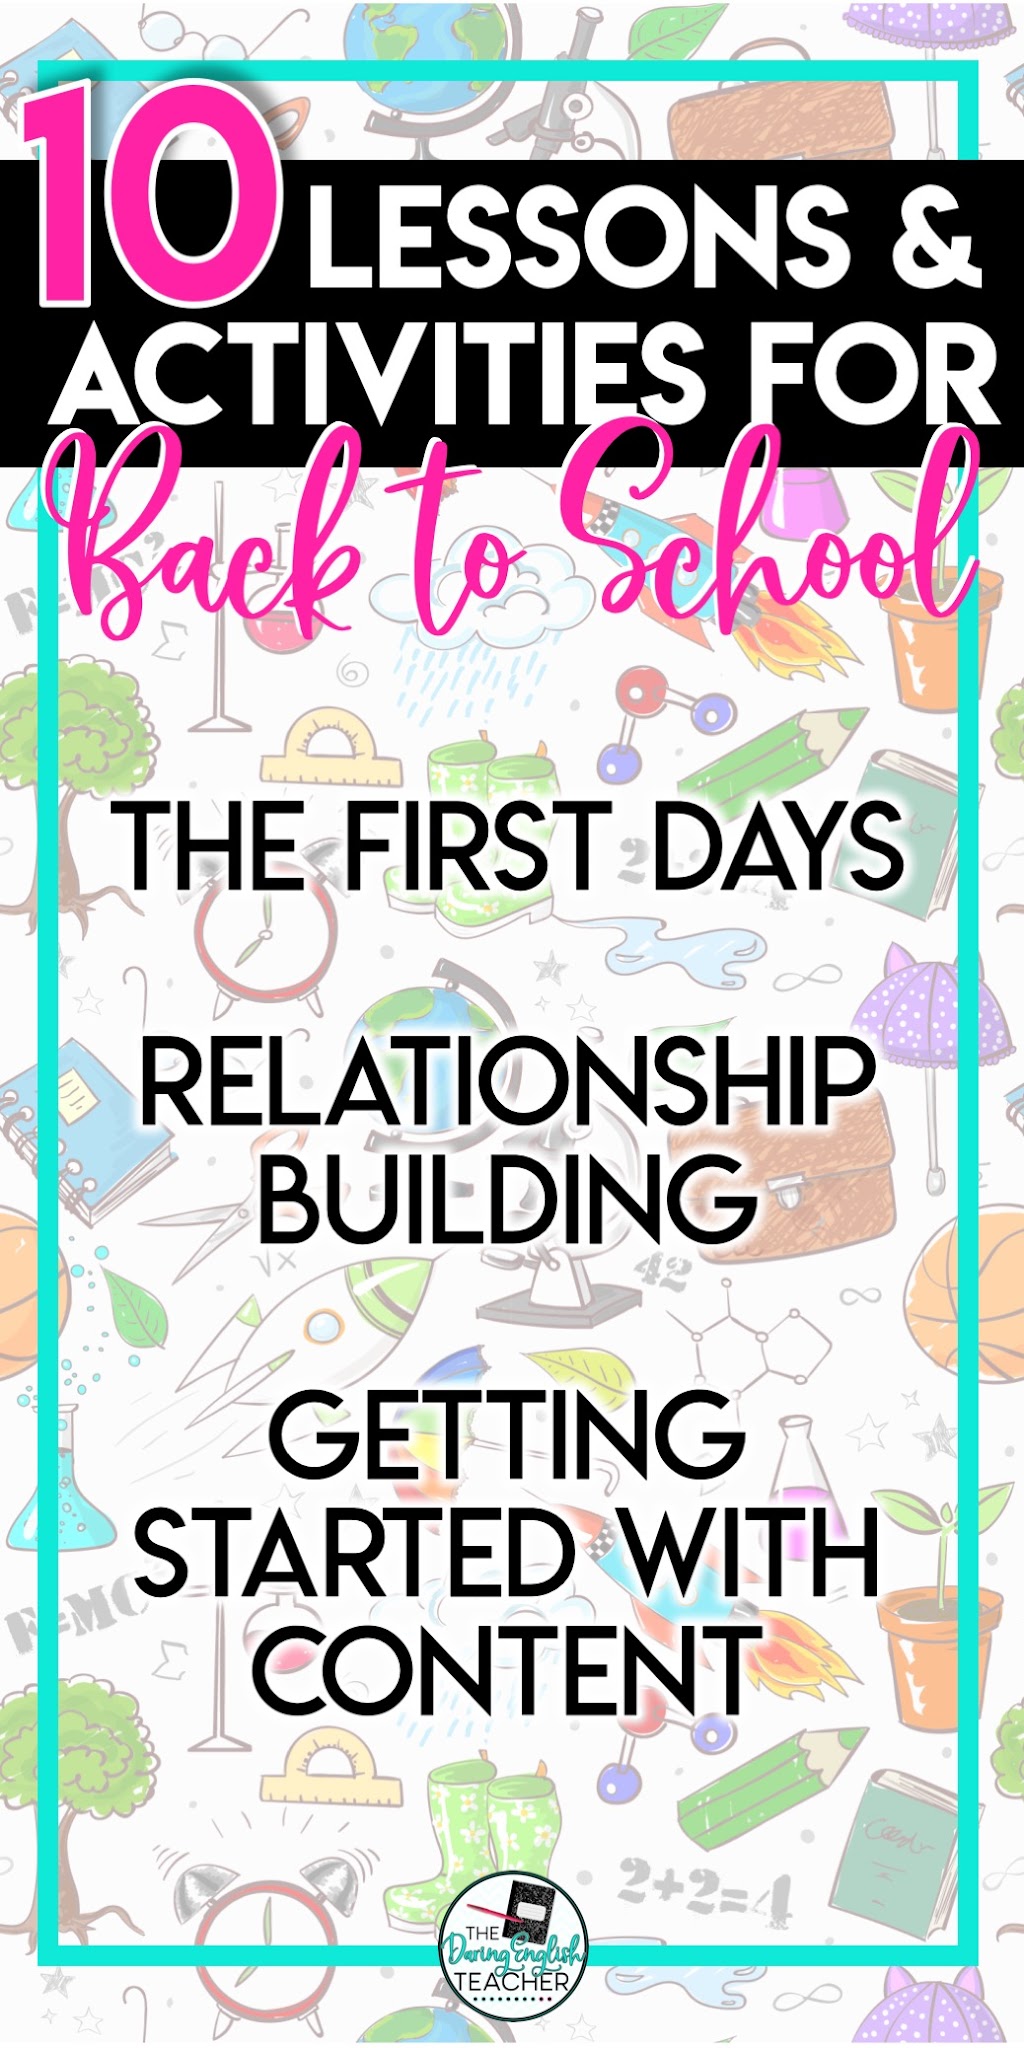 10 Lessons and Activities to Teach When You Go Back to School